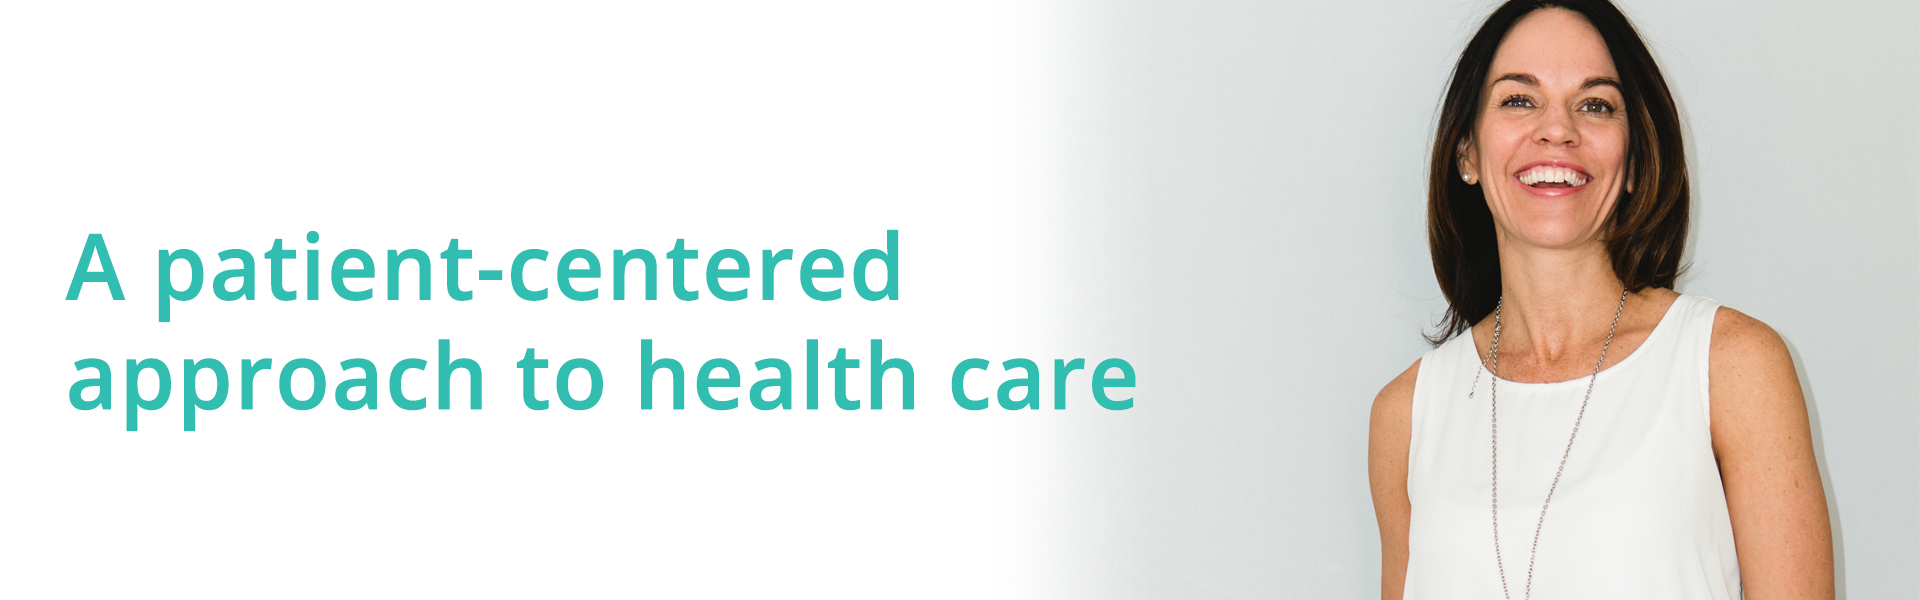 A patient-centered approach to health care